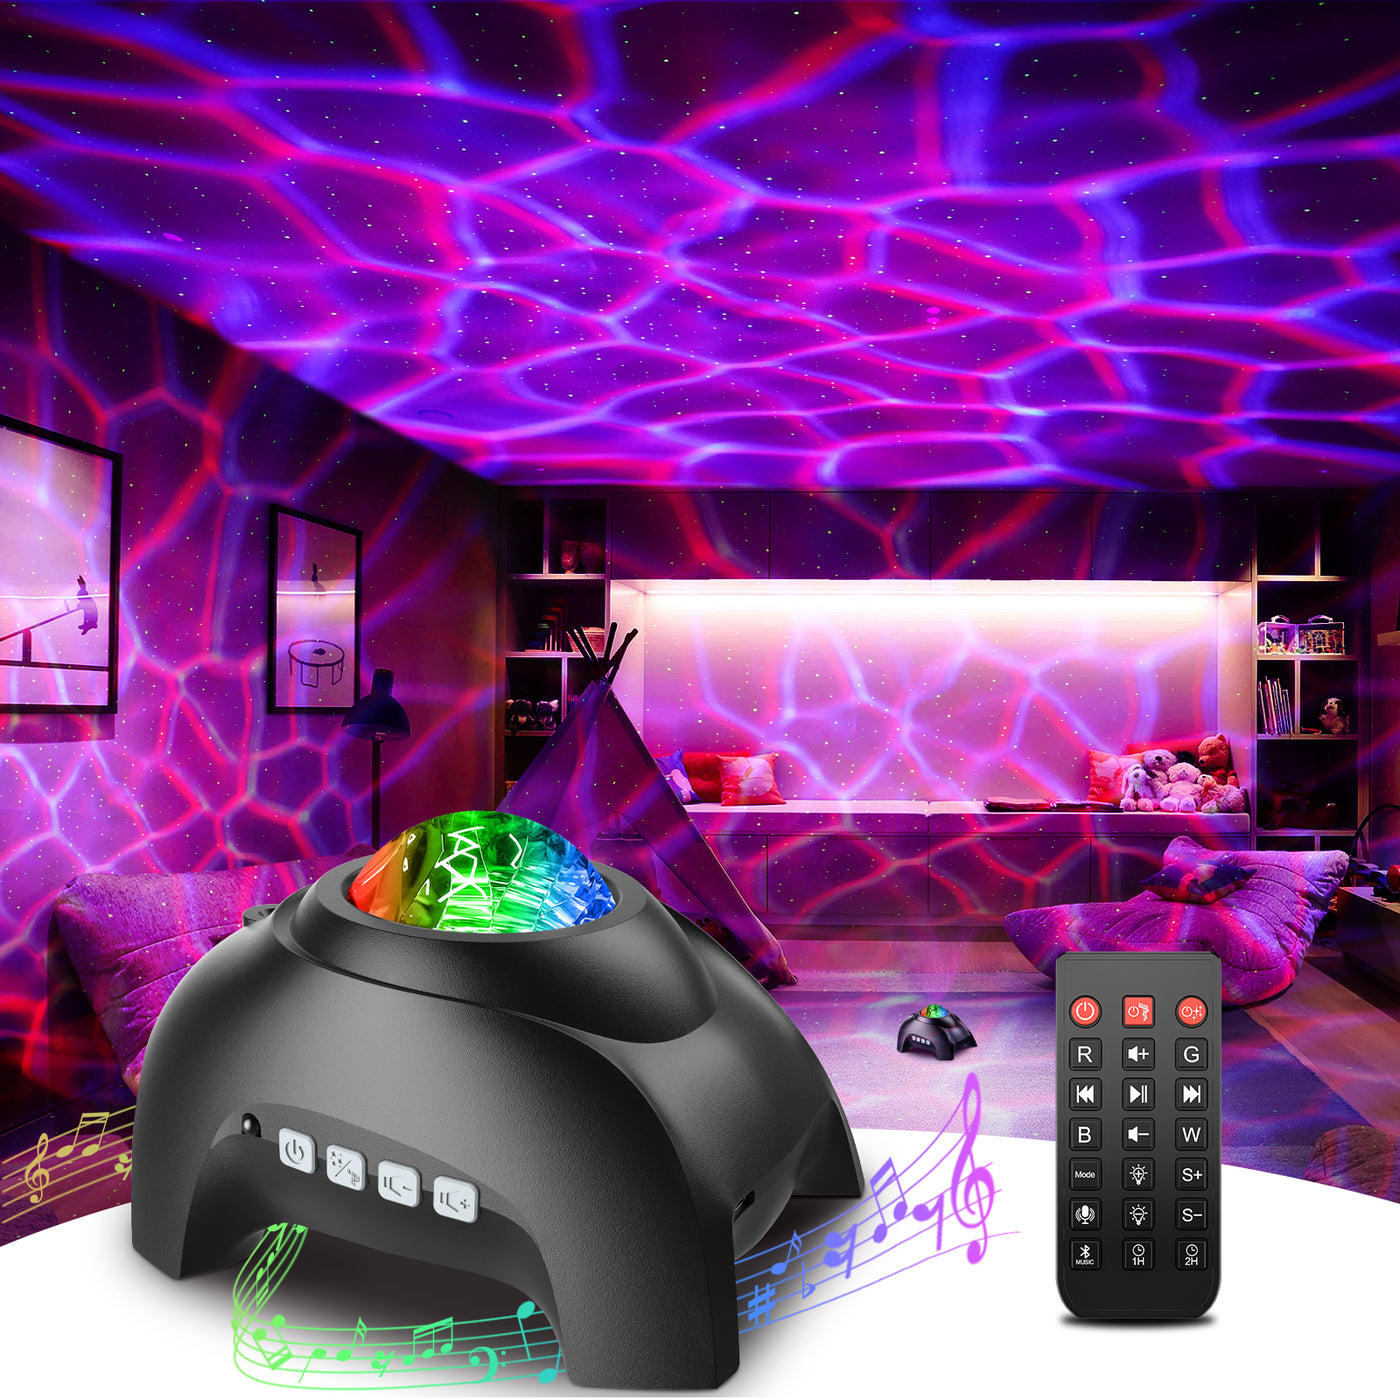 Star Projector, Galaxy Projector LED Lights for Bedroom, App Control  Projector with Bluetooth Speaker and White Noise, Night Light for Kids  Adults